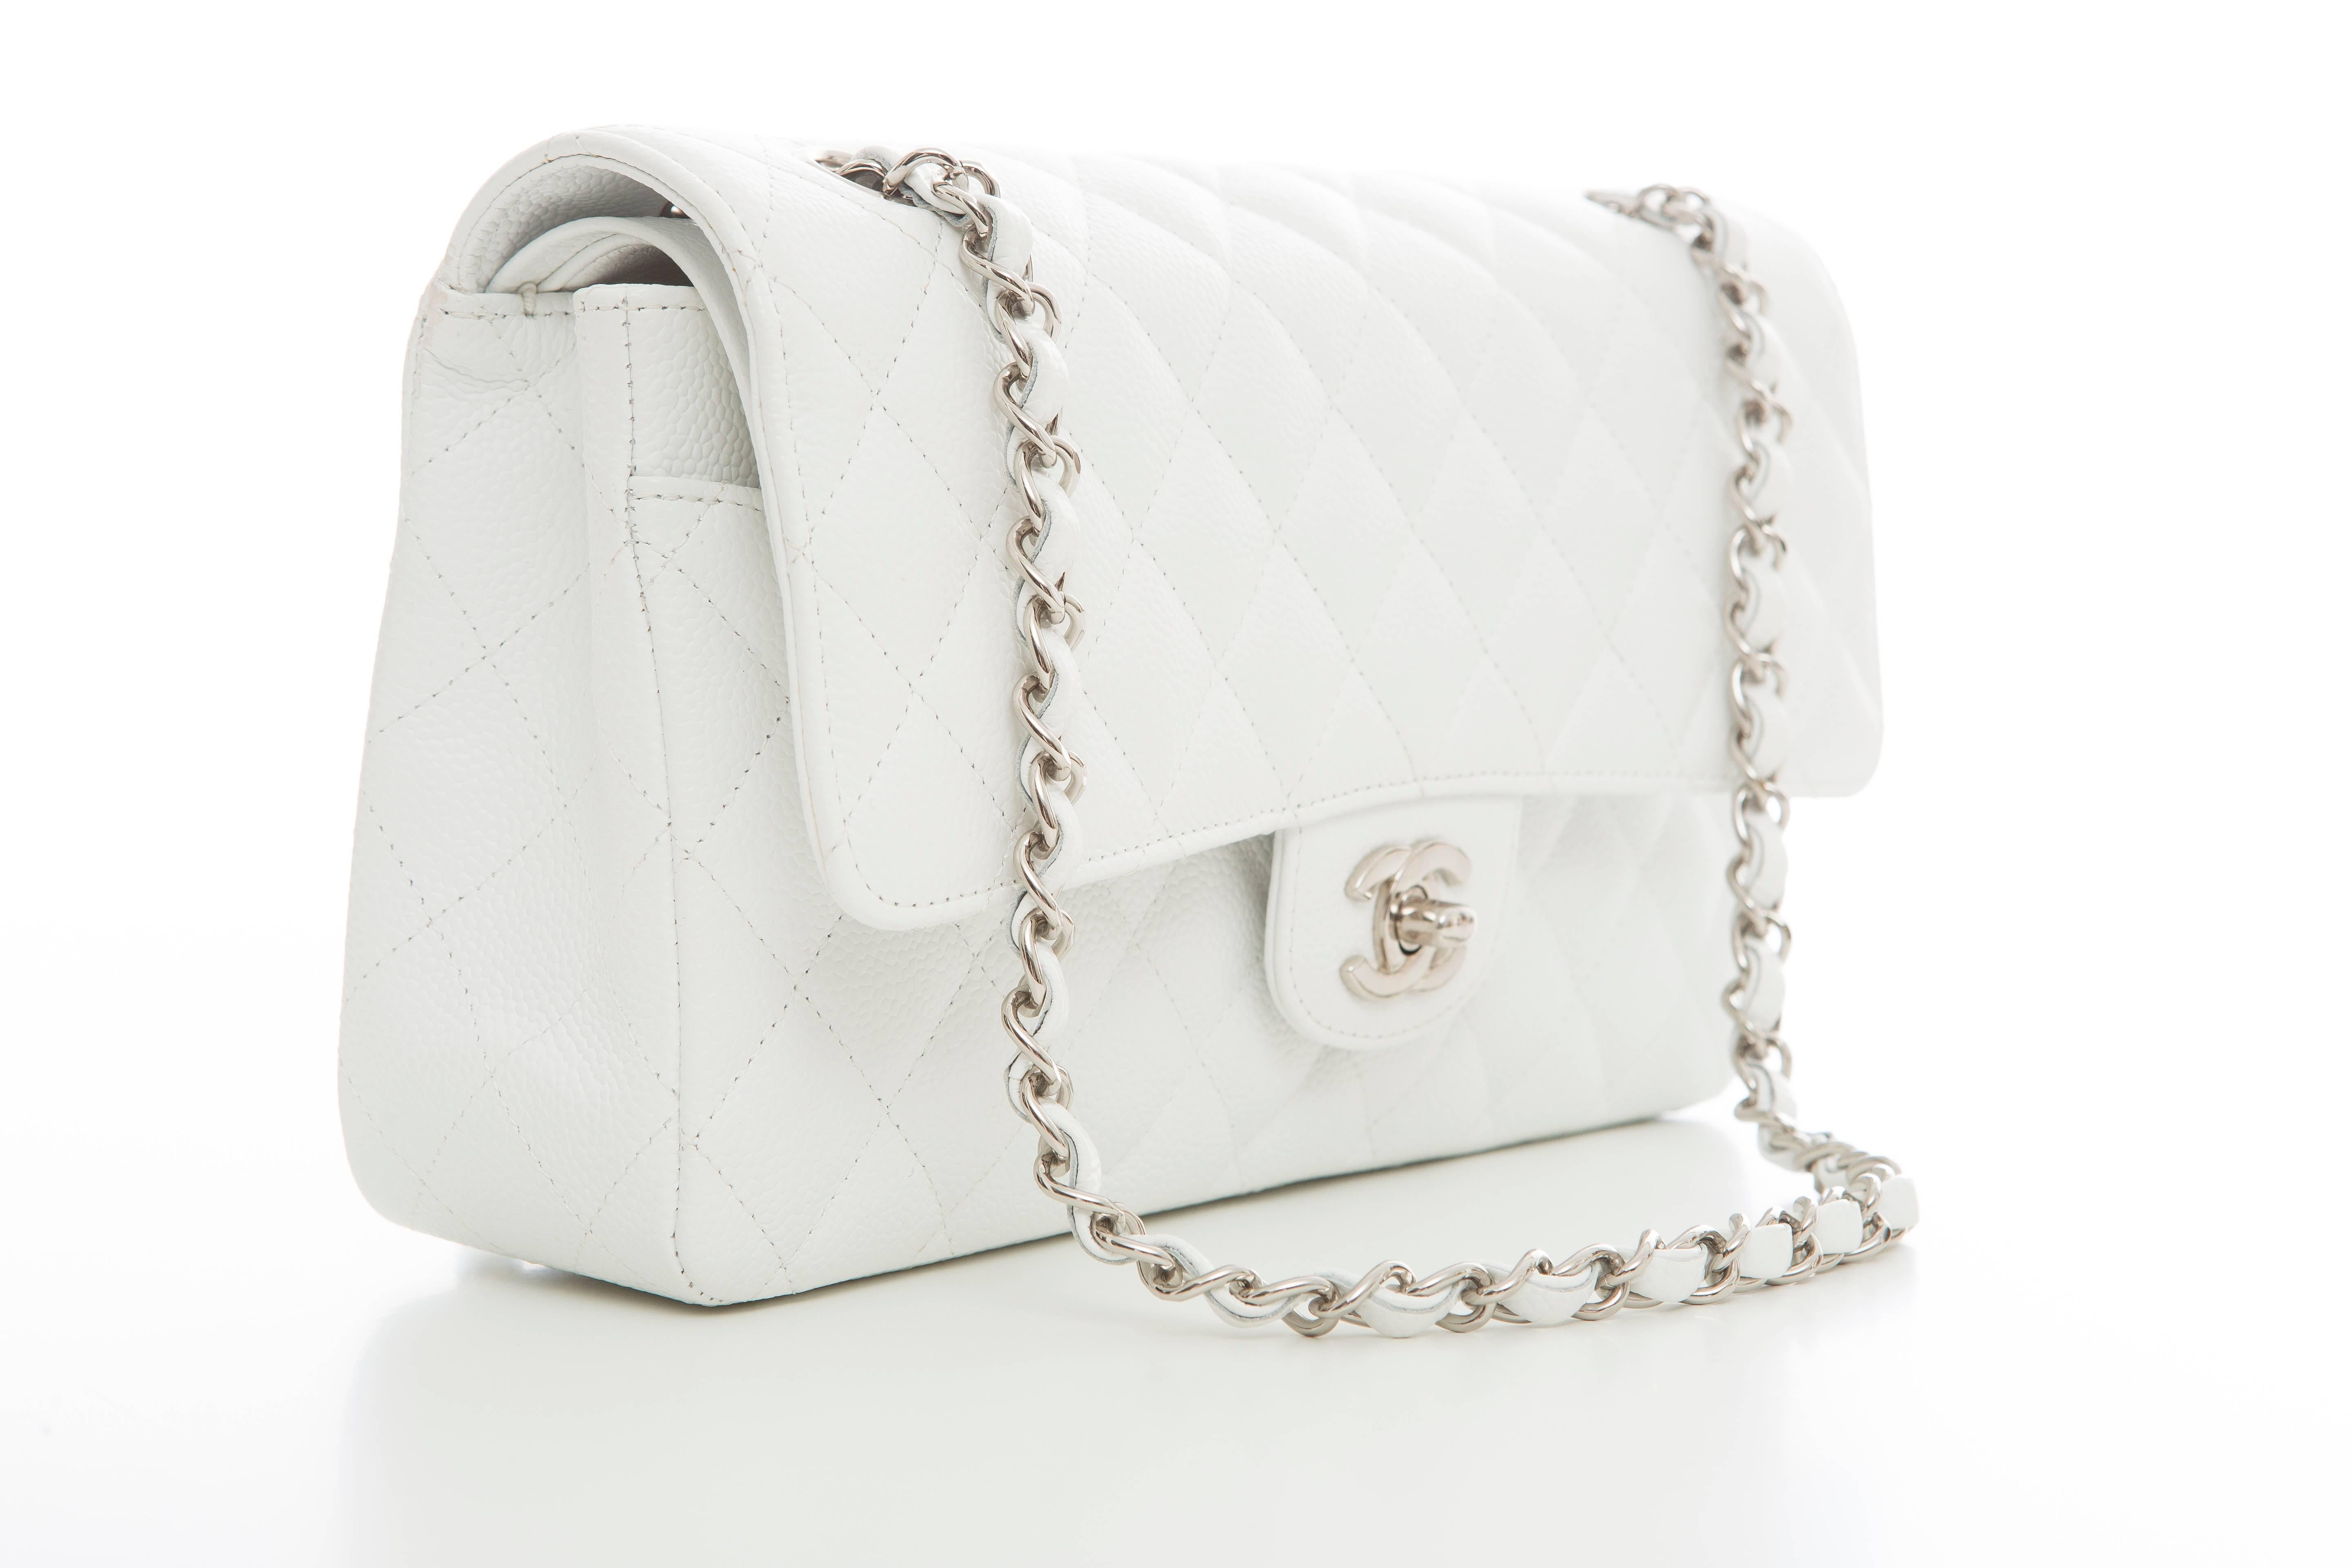 Chanel, Spring-Summer 2006, white quilted caviar medium leather classic double flap bag with silver-tone hardware, dual chain-link and leather shoulder straps, single exterior pocket, white leather lining, dual interior compartments and signature